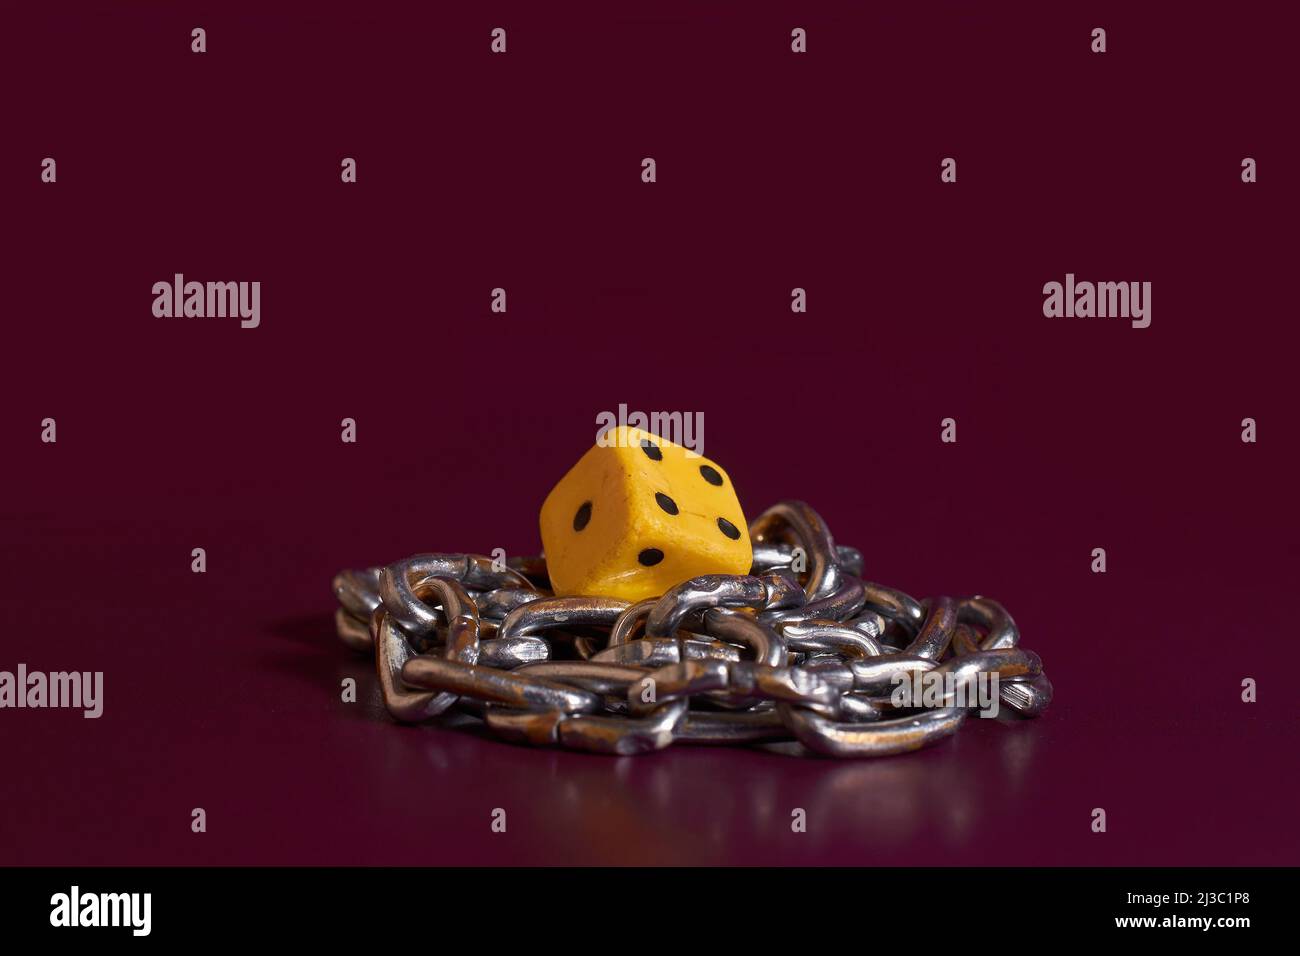 Gambling addiction. The game cube is wrapped with a chain  Stock Photo